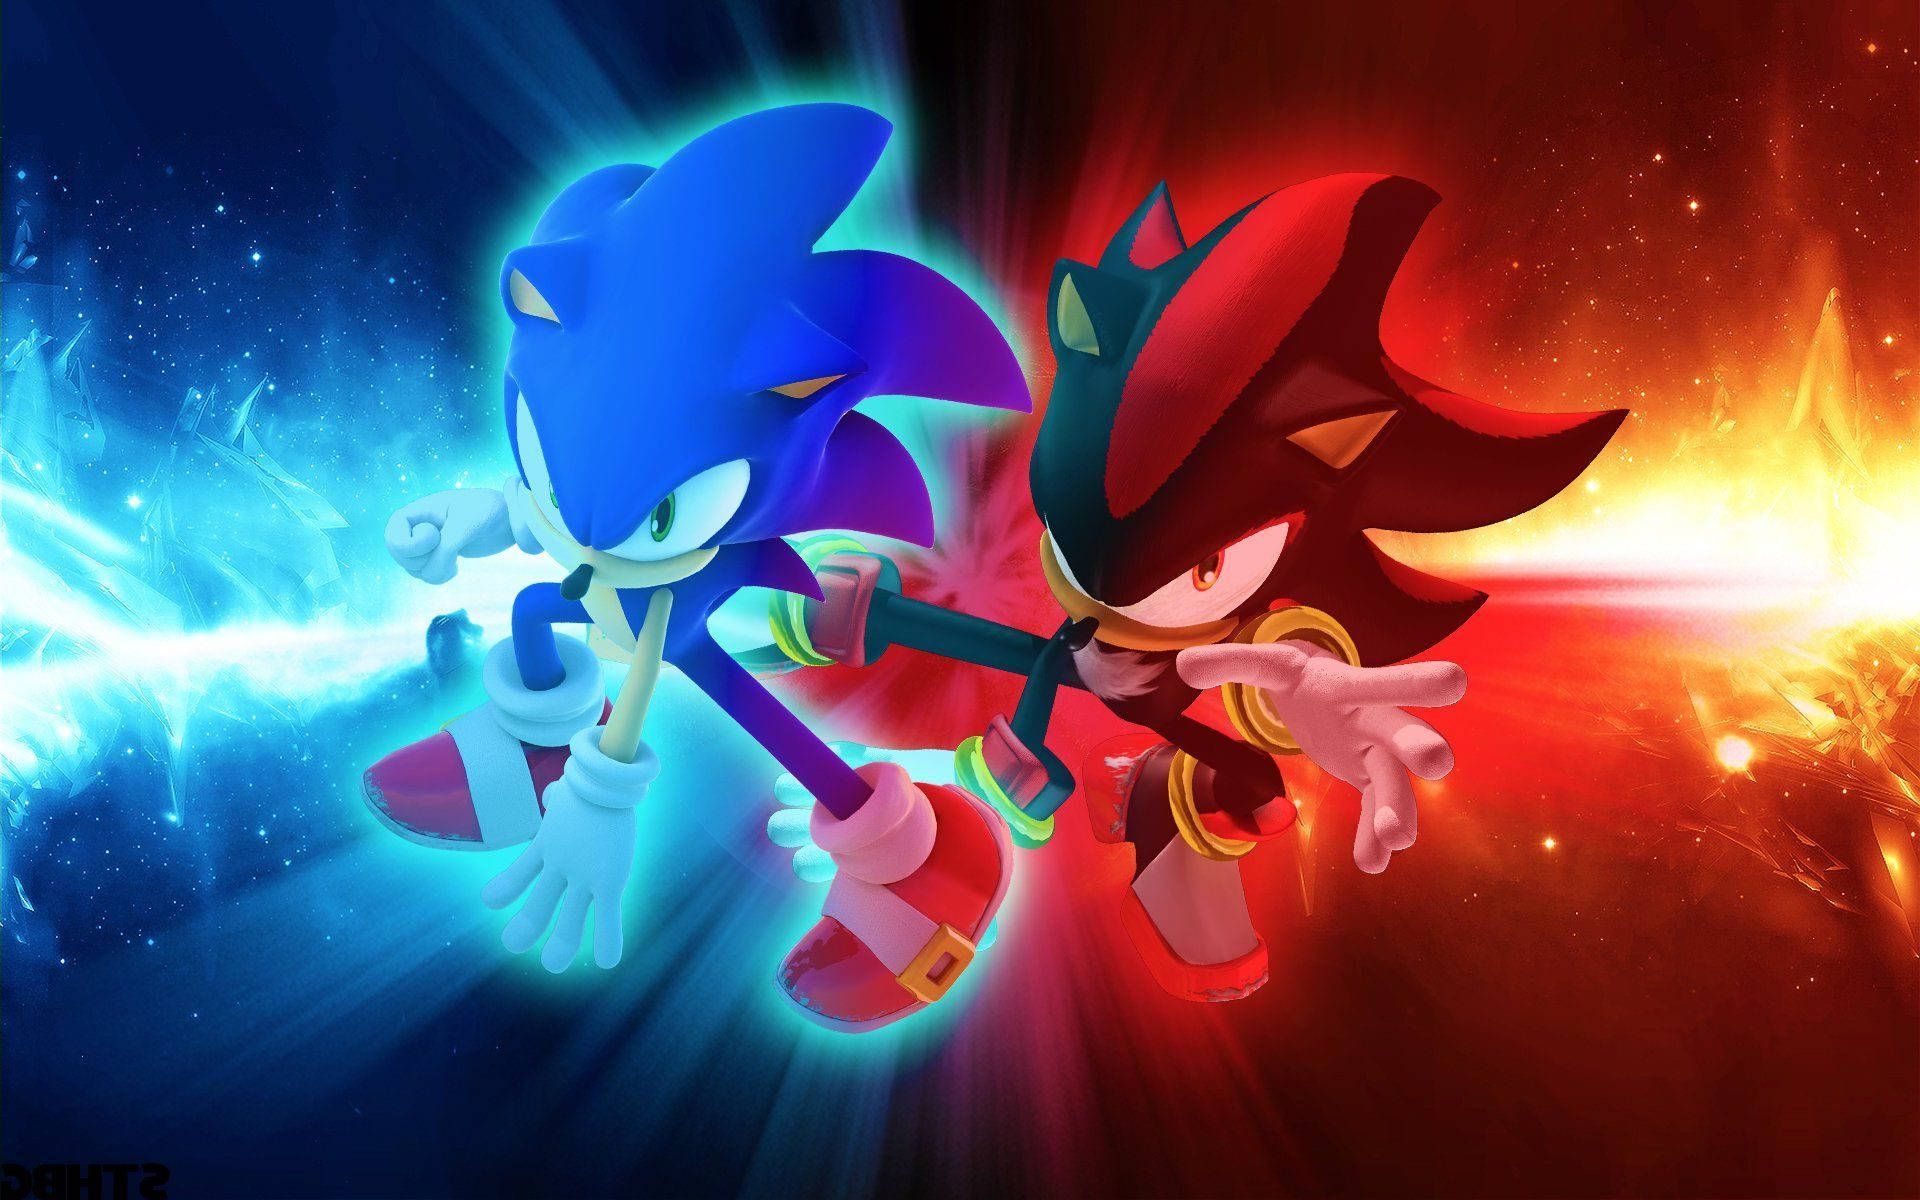 Coolsonic Och Dark Sonic. (note: Since The Concept Of Computer Or Mobile Wallpaper Is Not Explicitly Mentioned, I Assumed That This Phrase Is To Be Used As The Actual Wallpaper Title, And Not In A Sentence Describing The Wallpaper.) Wallpaper